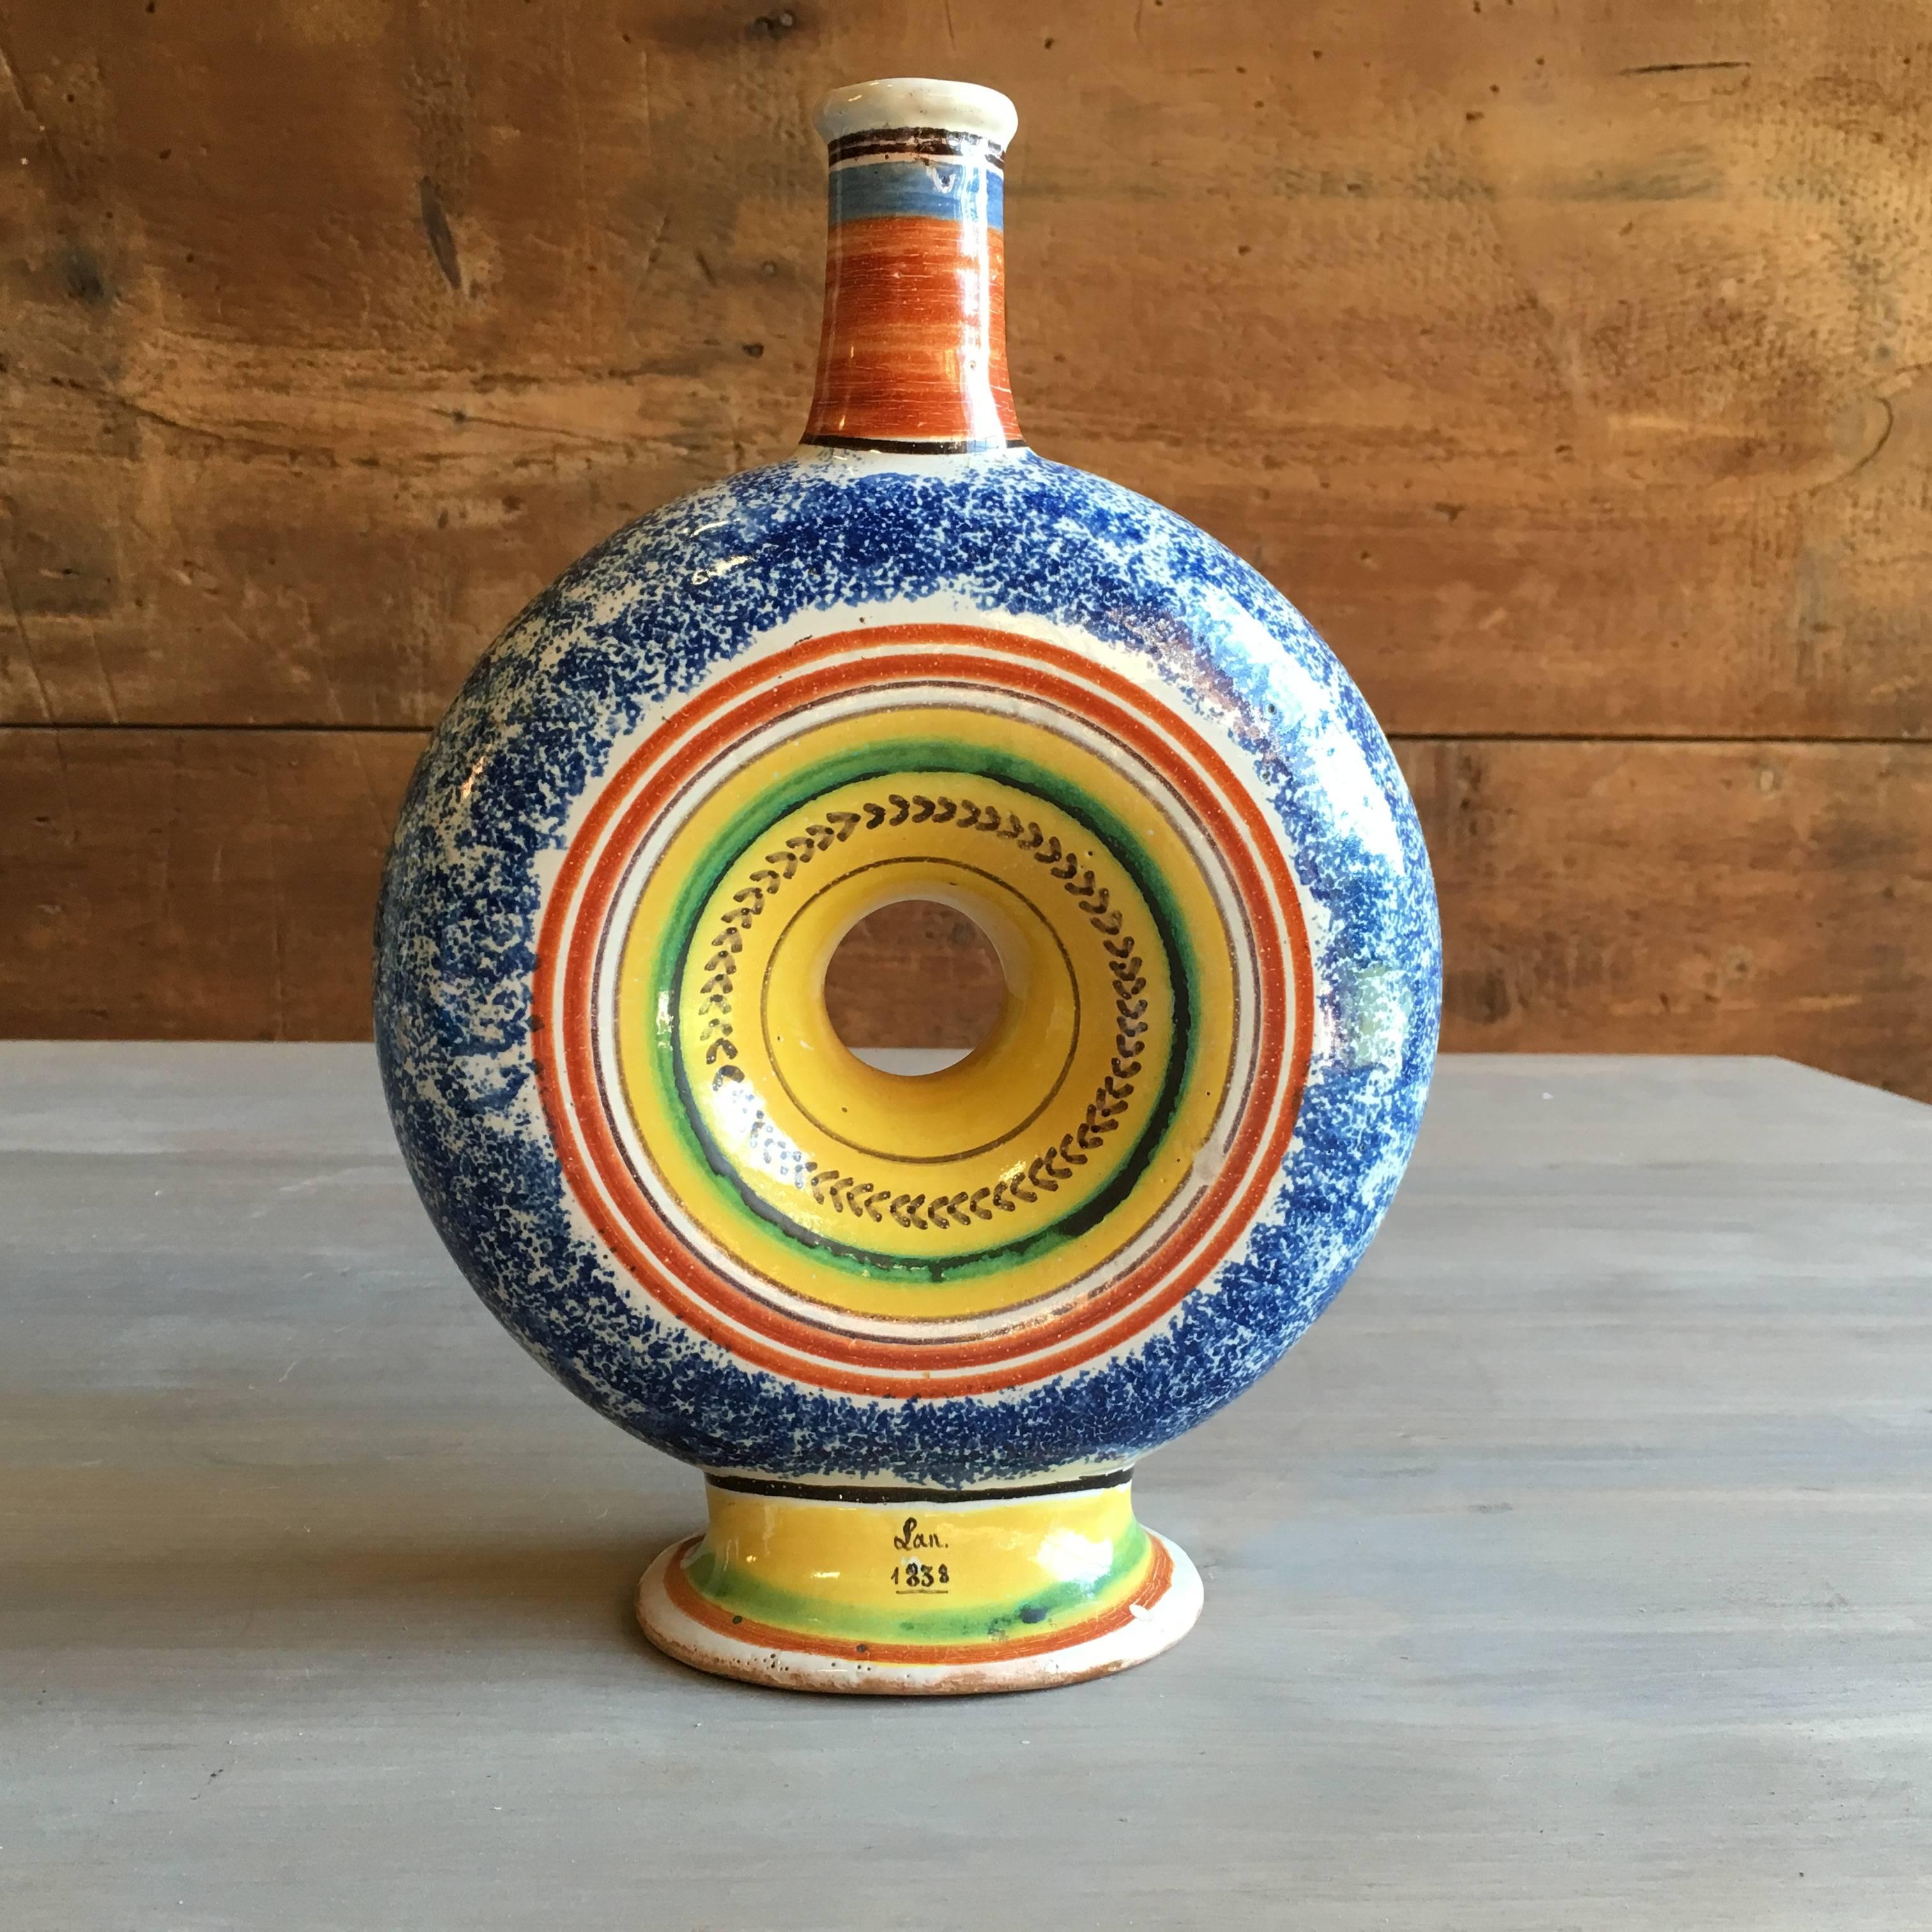 French Provincial 19th Century French Faience Bottle, Dated 1838 For Sale